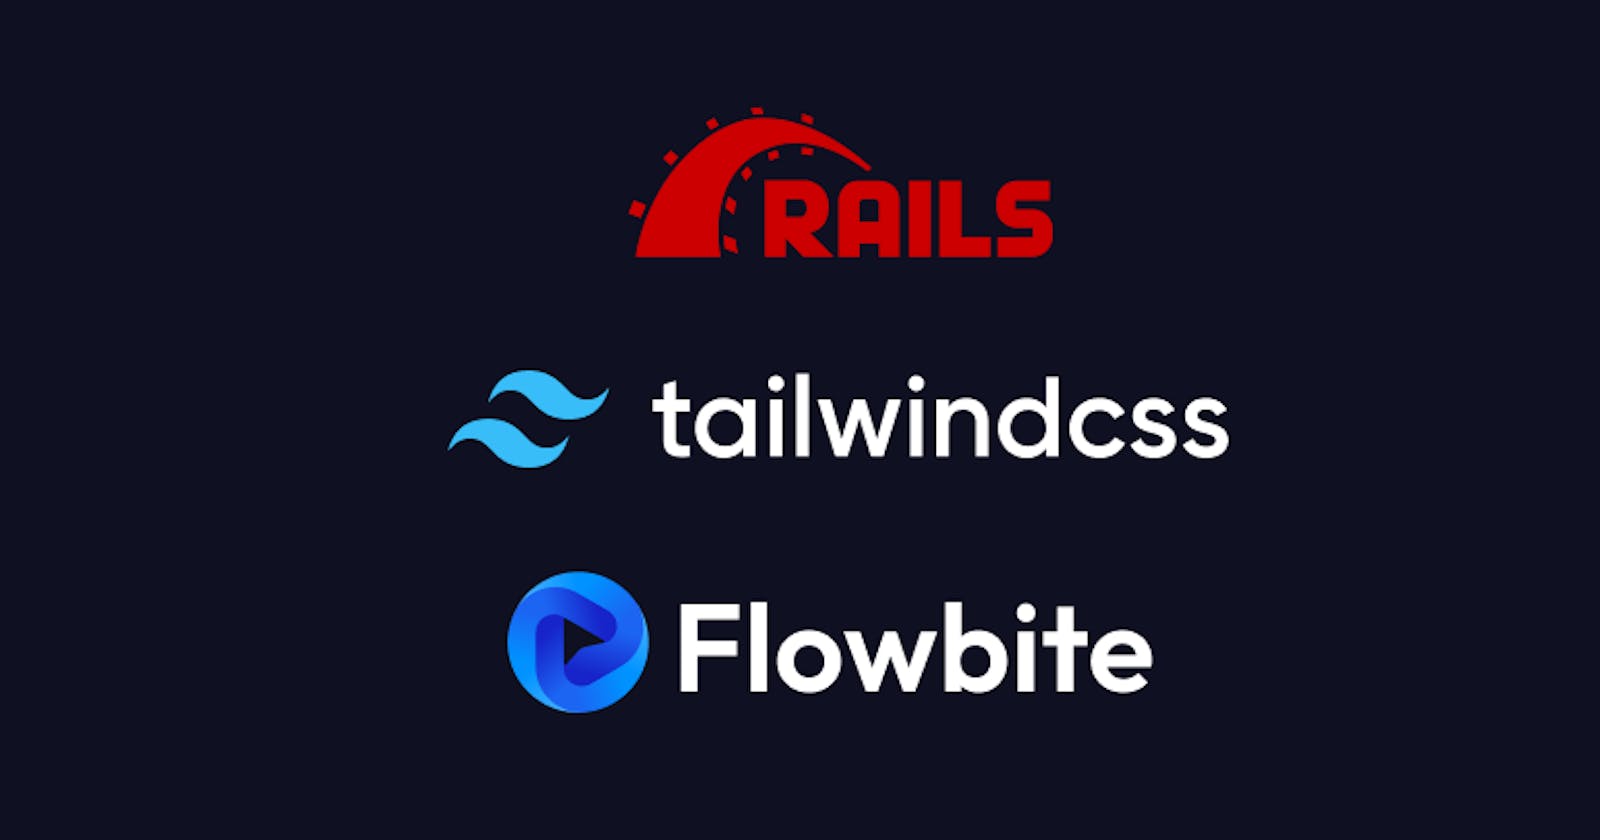 How to set up Ruby on Rails with Tailwind CSS and Flowbite